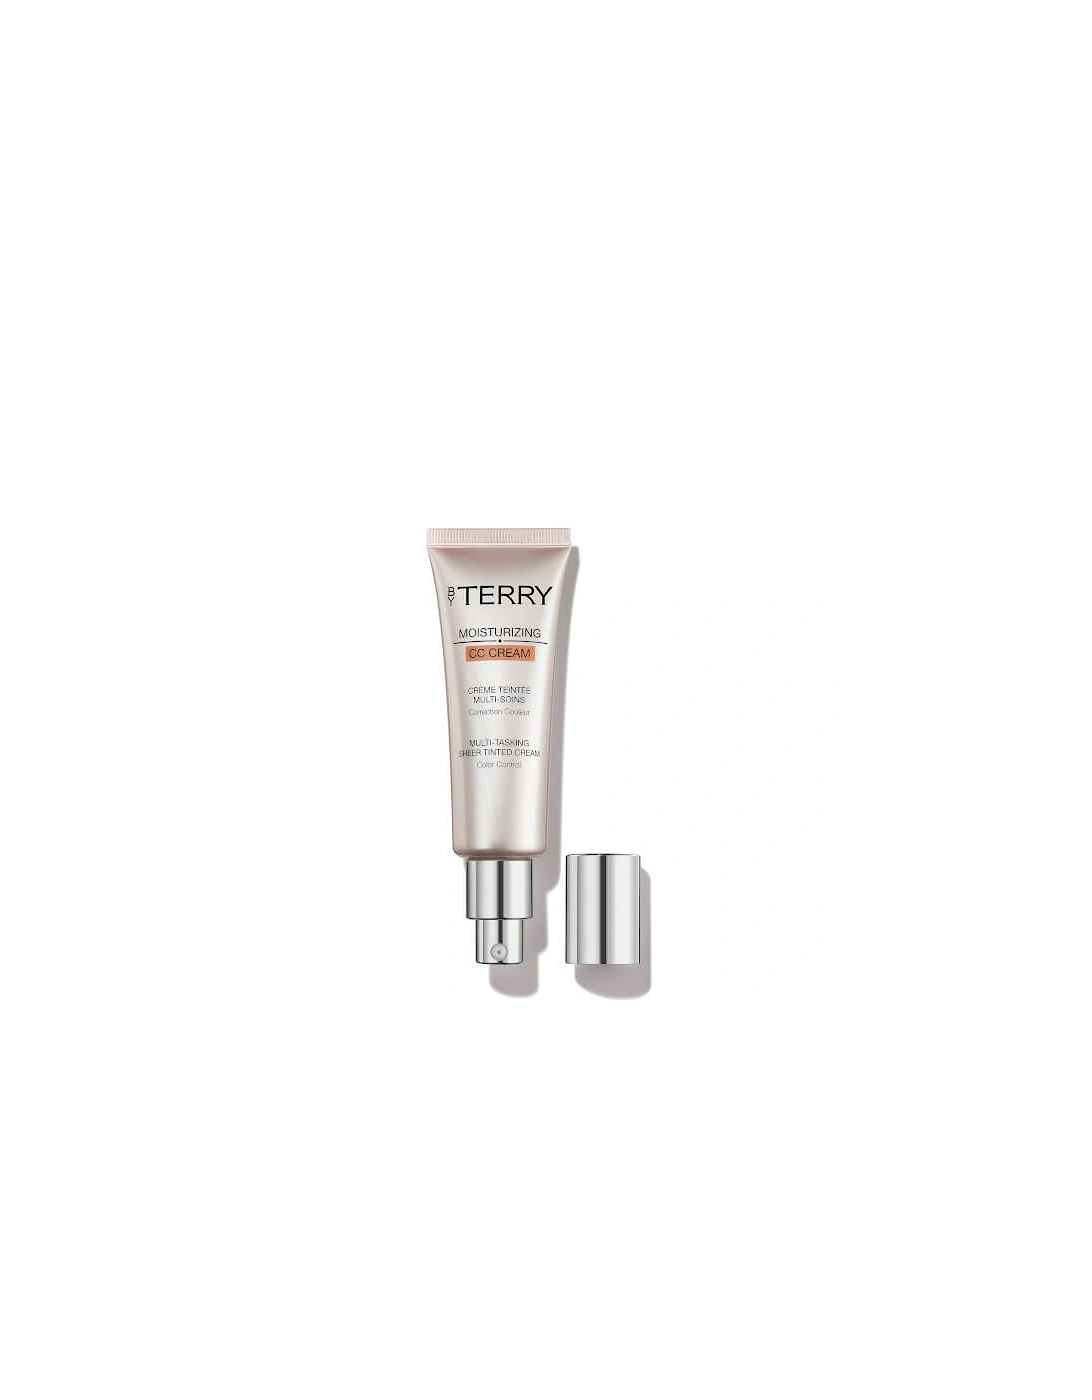 By Terry Moisturising CC Cream - 1. Nude - By Terry - By Terry Moisturising CC Cream - 1. Nude - By Terry Moisturising CC Cream - 2. Natural - By Terry Moisturising CC Cream - 3. Beige - By Terry Moisturising CC Cream - 4. Tan, 2 of 1